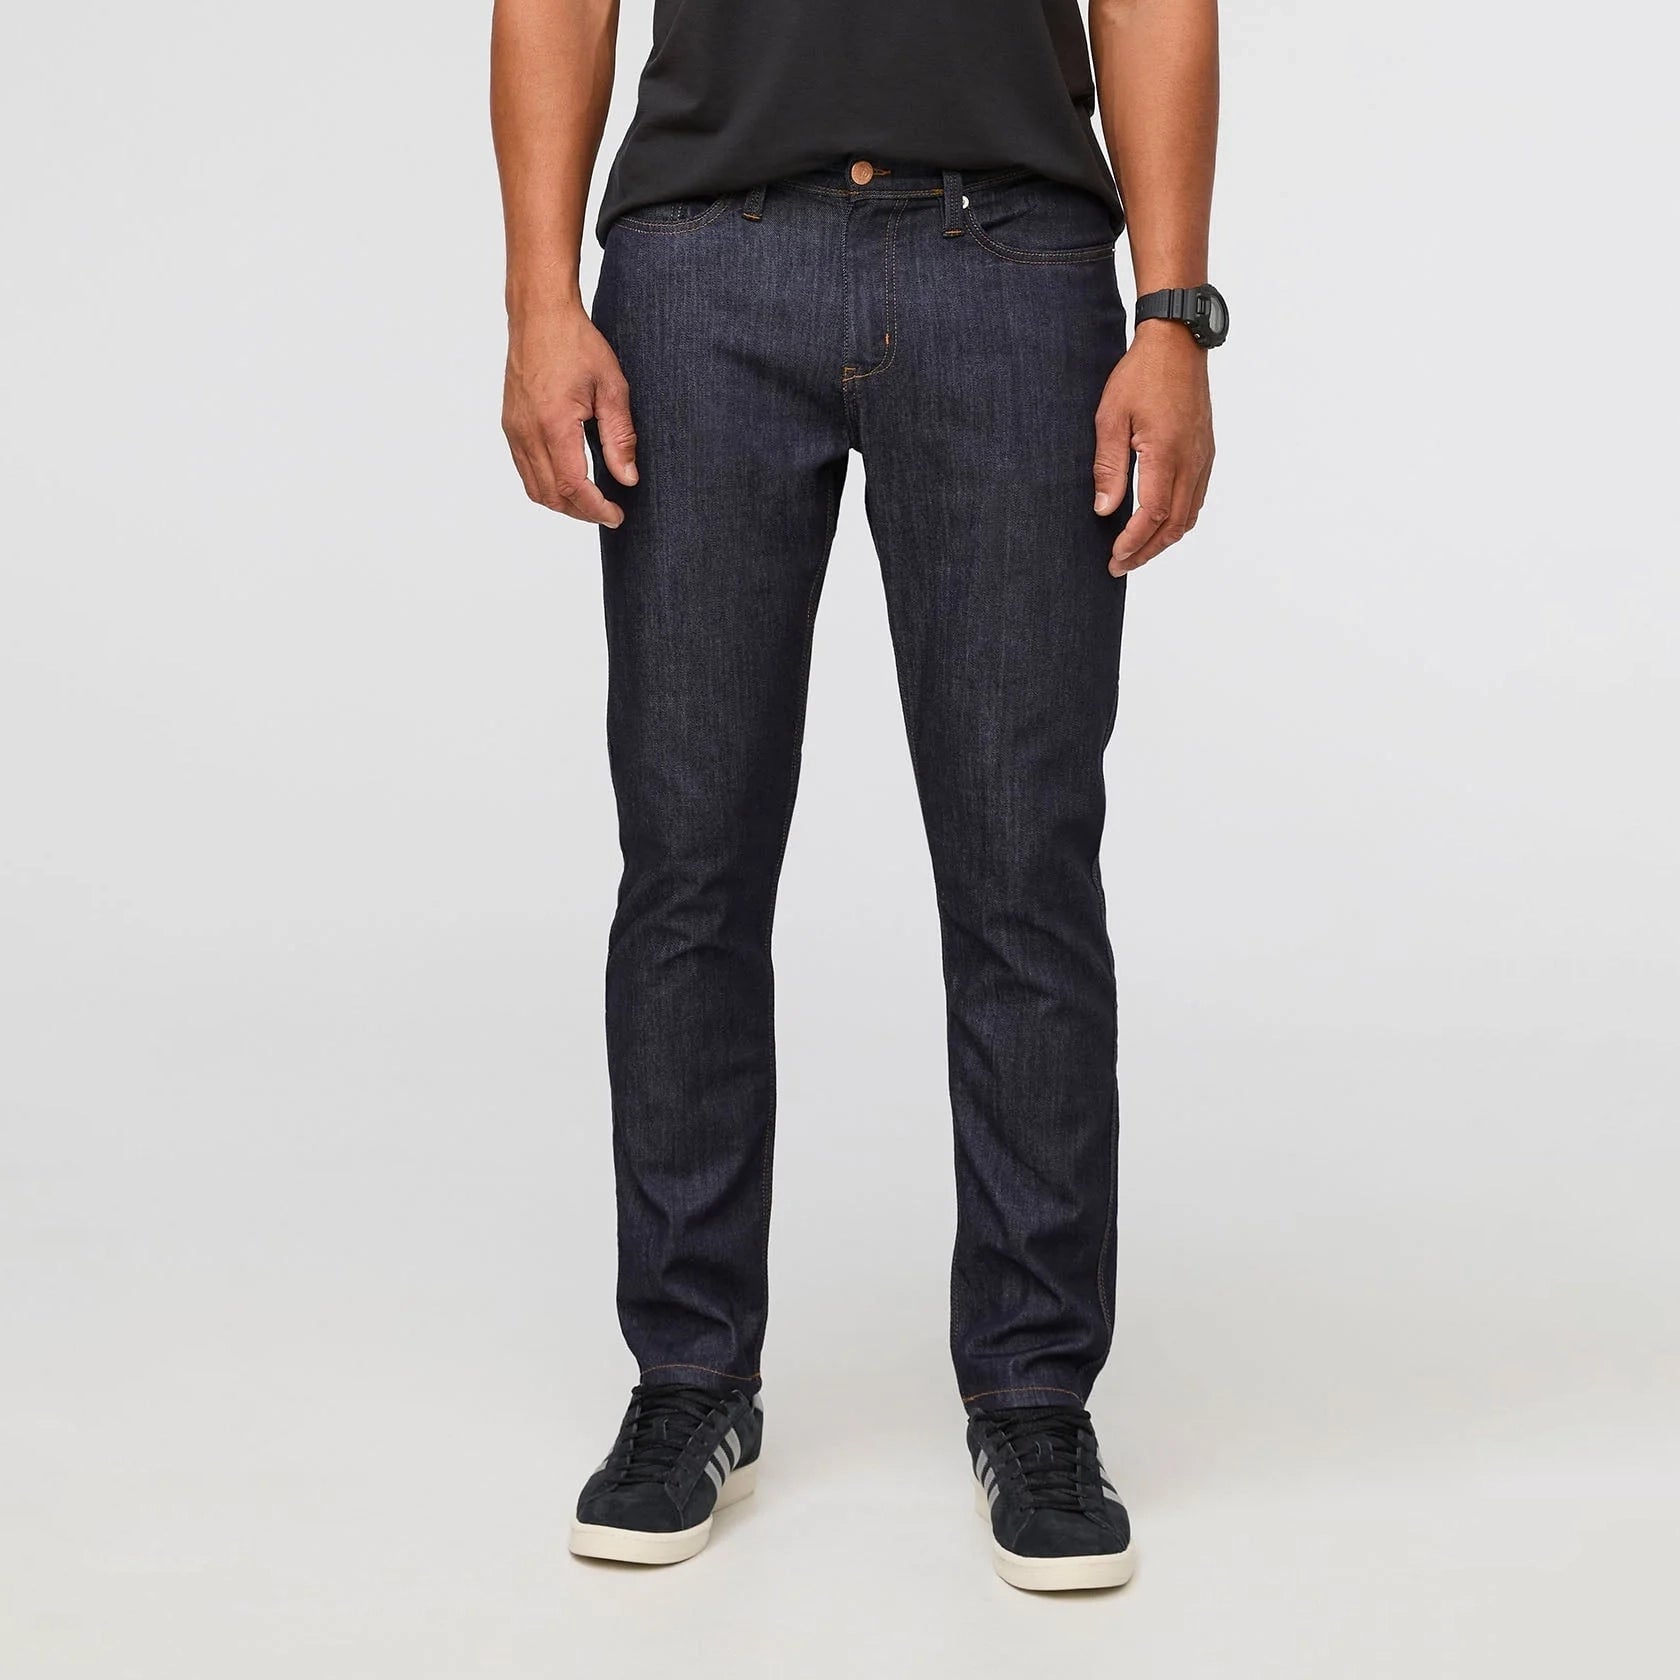 'Du/er Performance Denim Jean Relaxed Taper - Heritage Rinse' in 'Heritage Rinse' colour